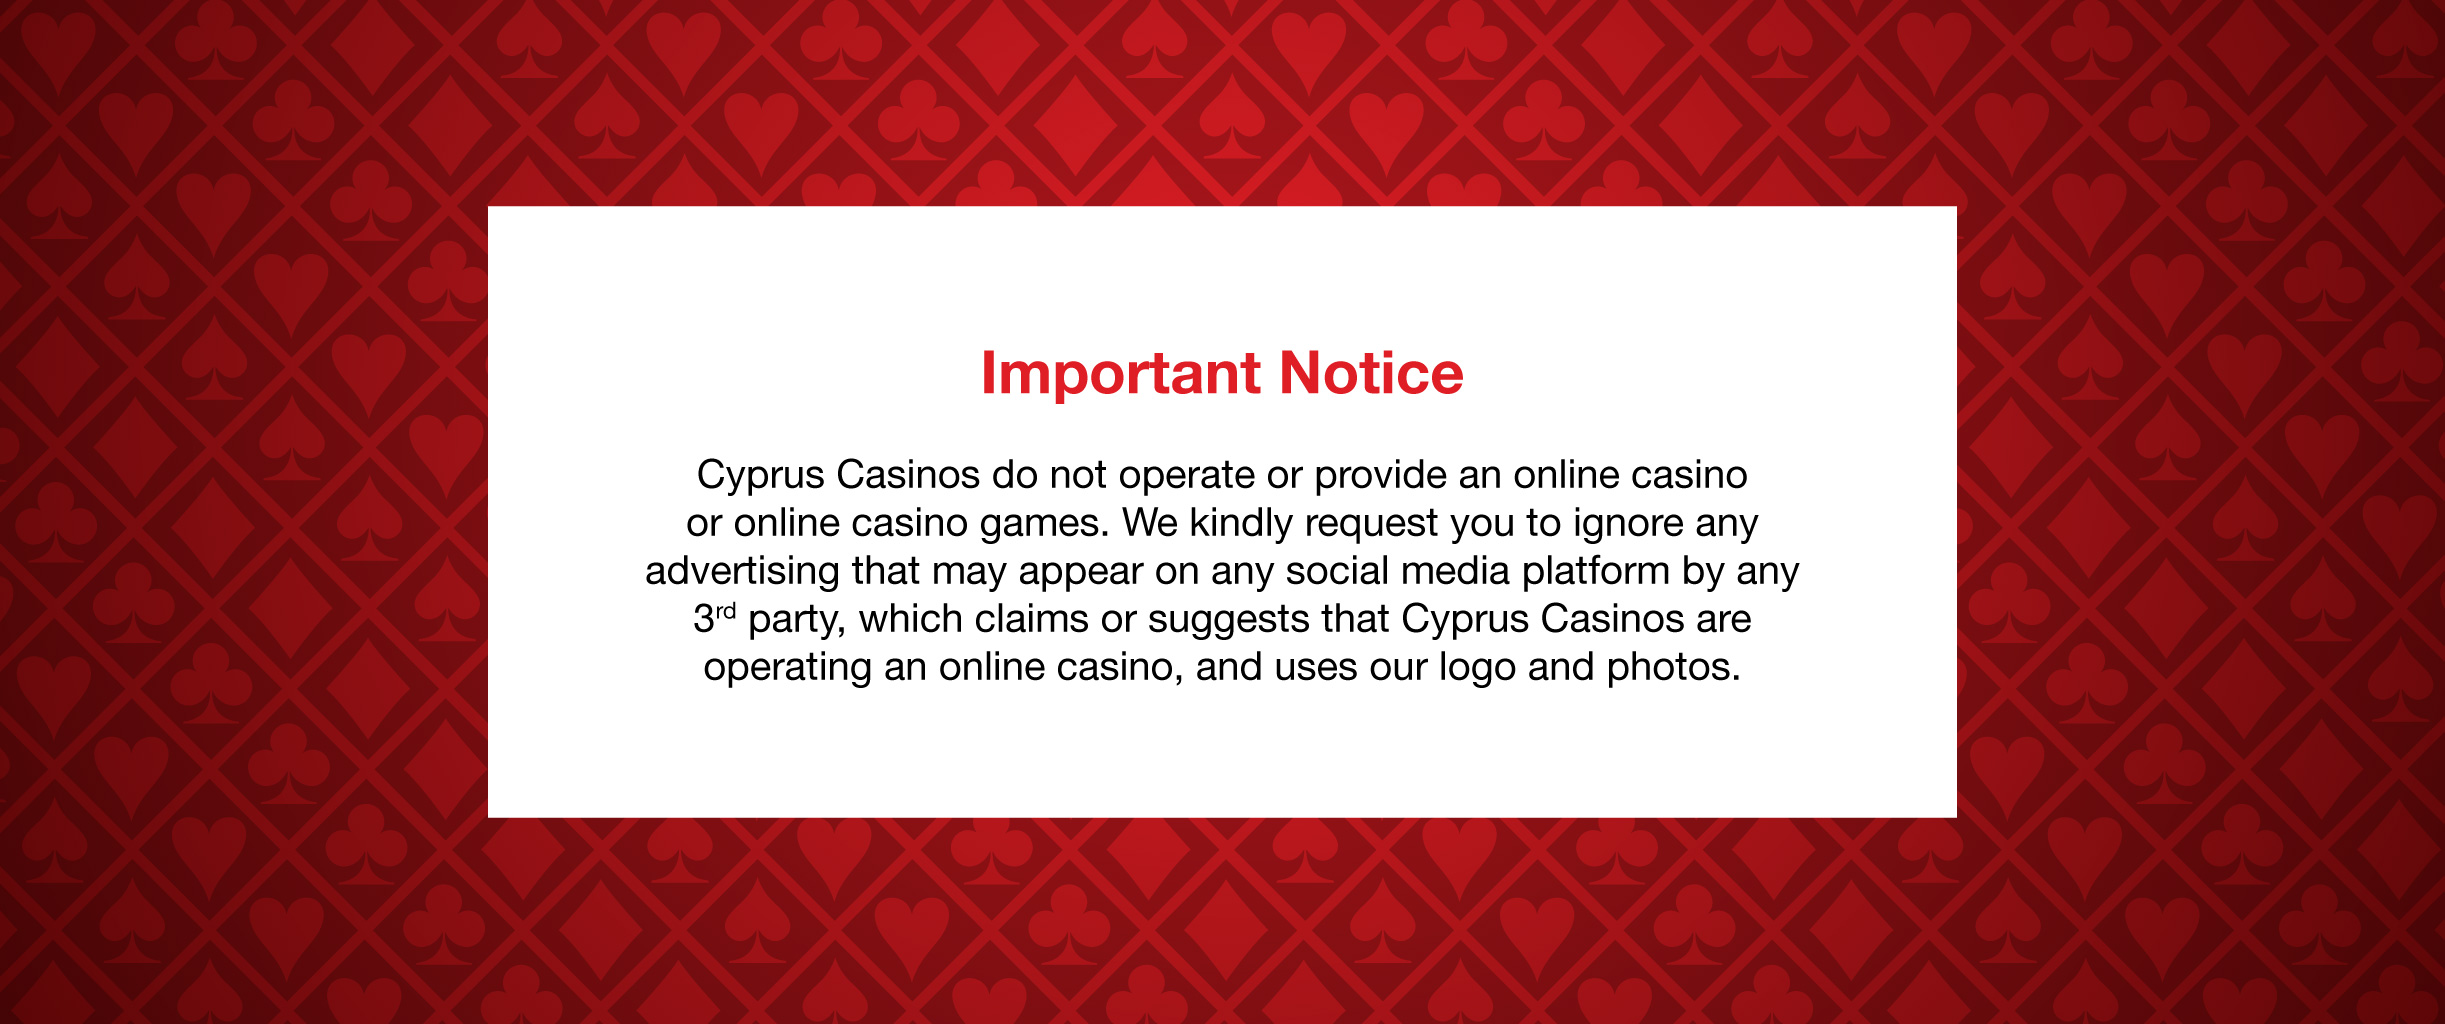 I Don't Want To Spend This Much Time On Online Casinos Cyprus. How About You?